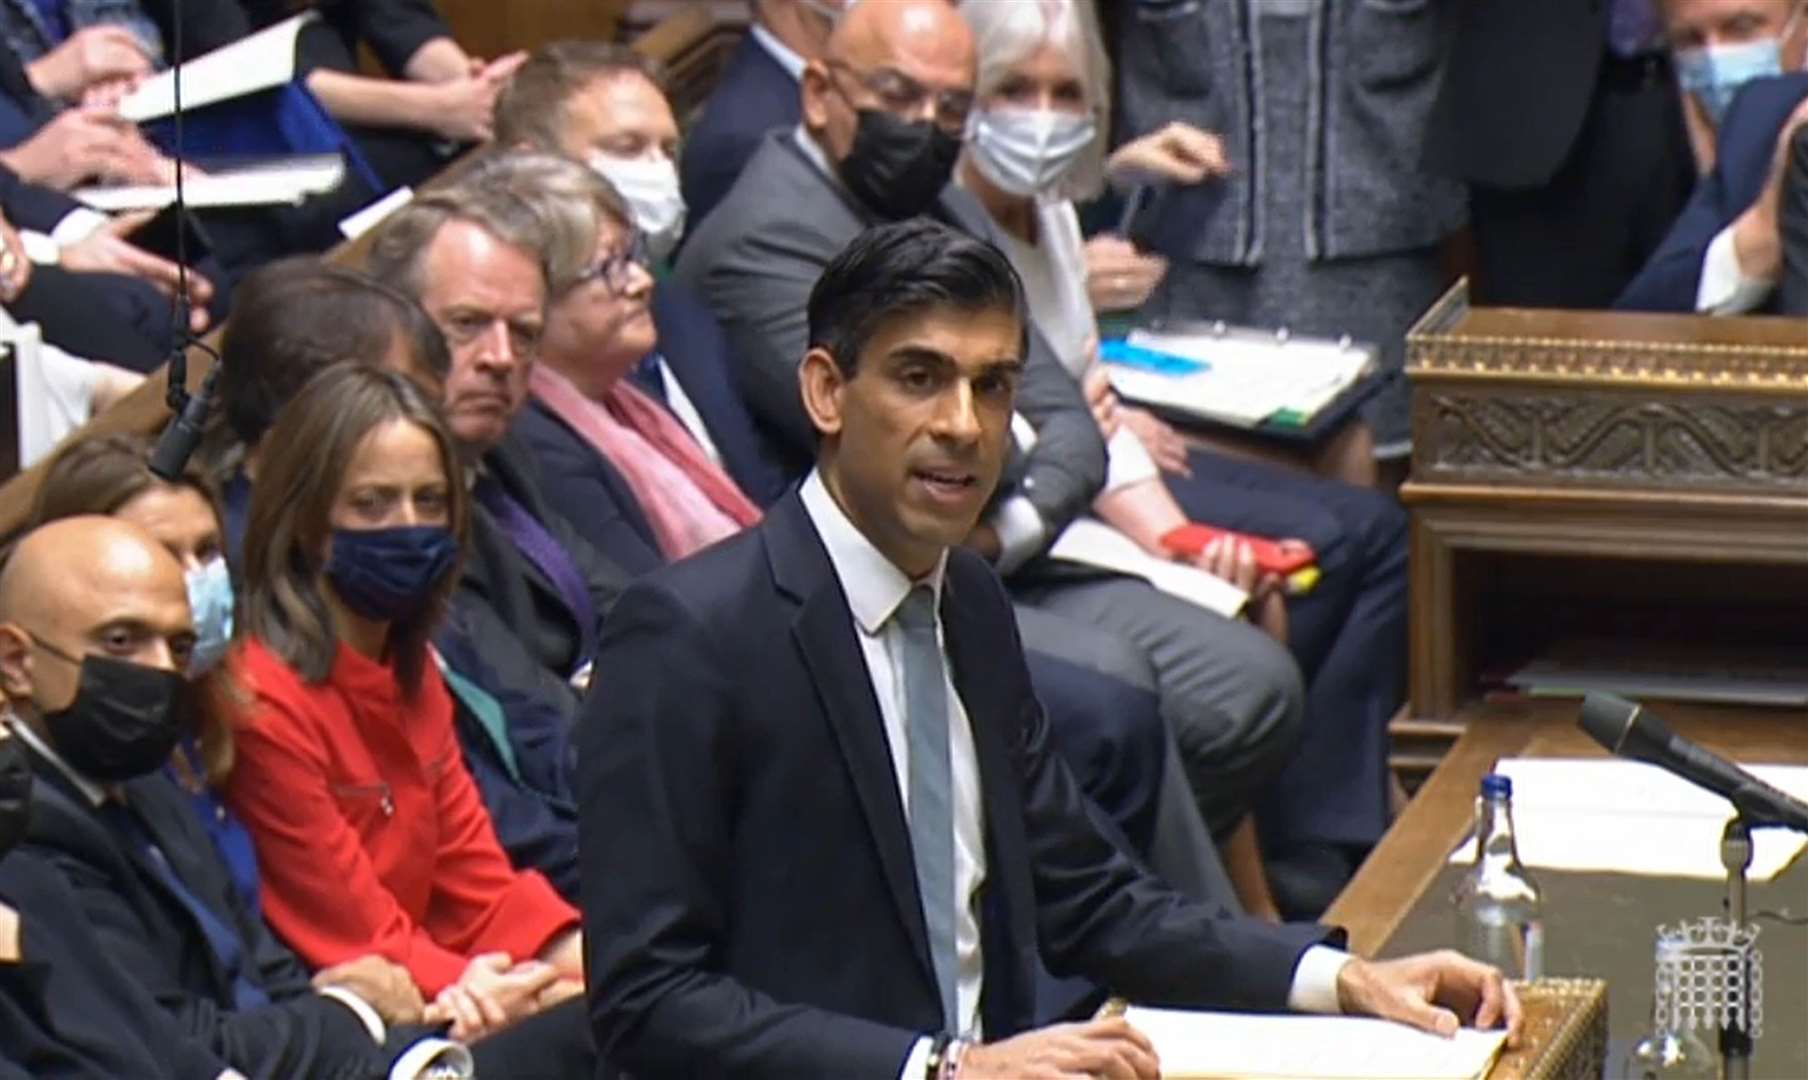 Chancellor of the Exchequer Rishi Sunak delivering his Budget to the House of Commons in London (House of Commons/PA)